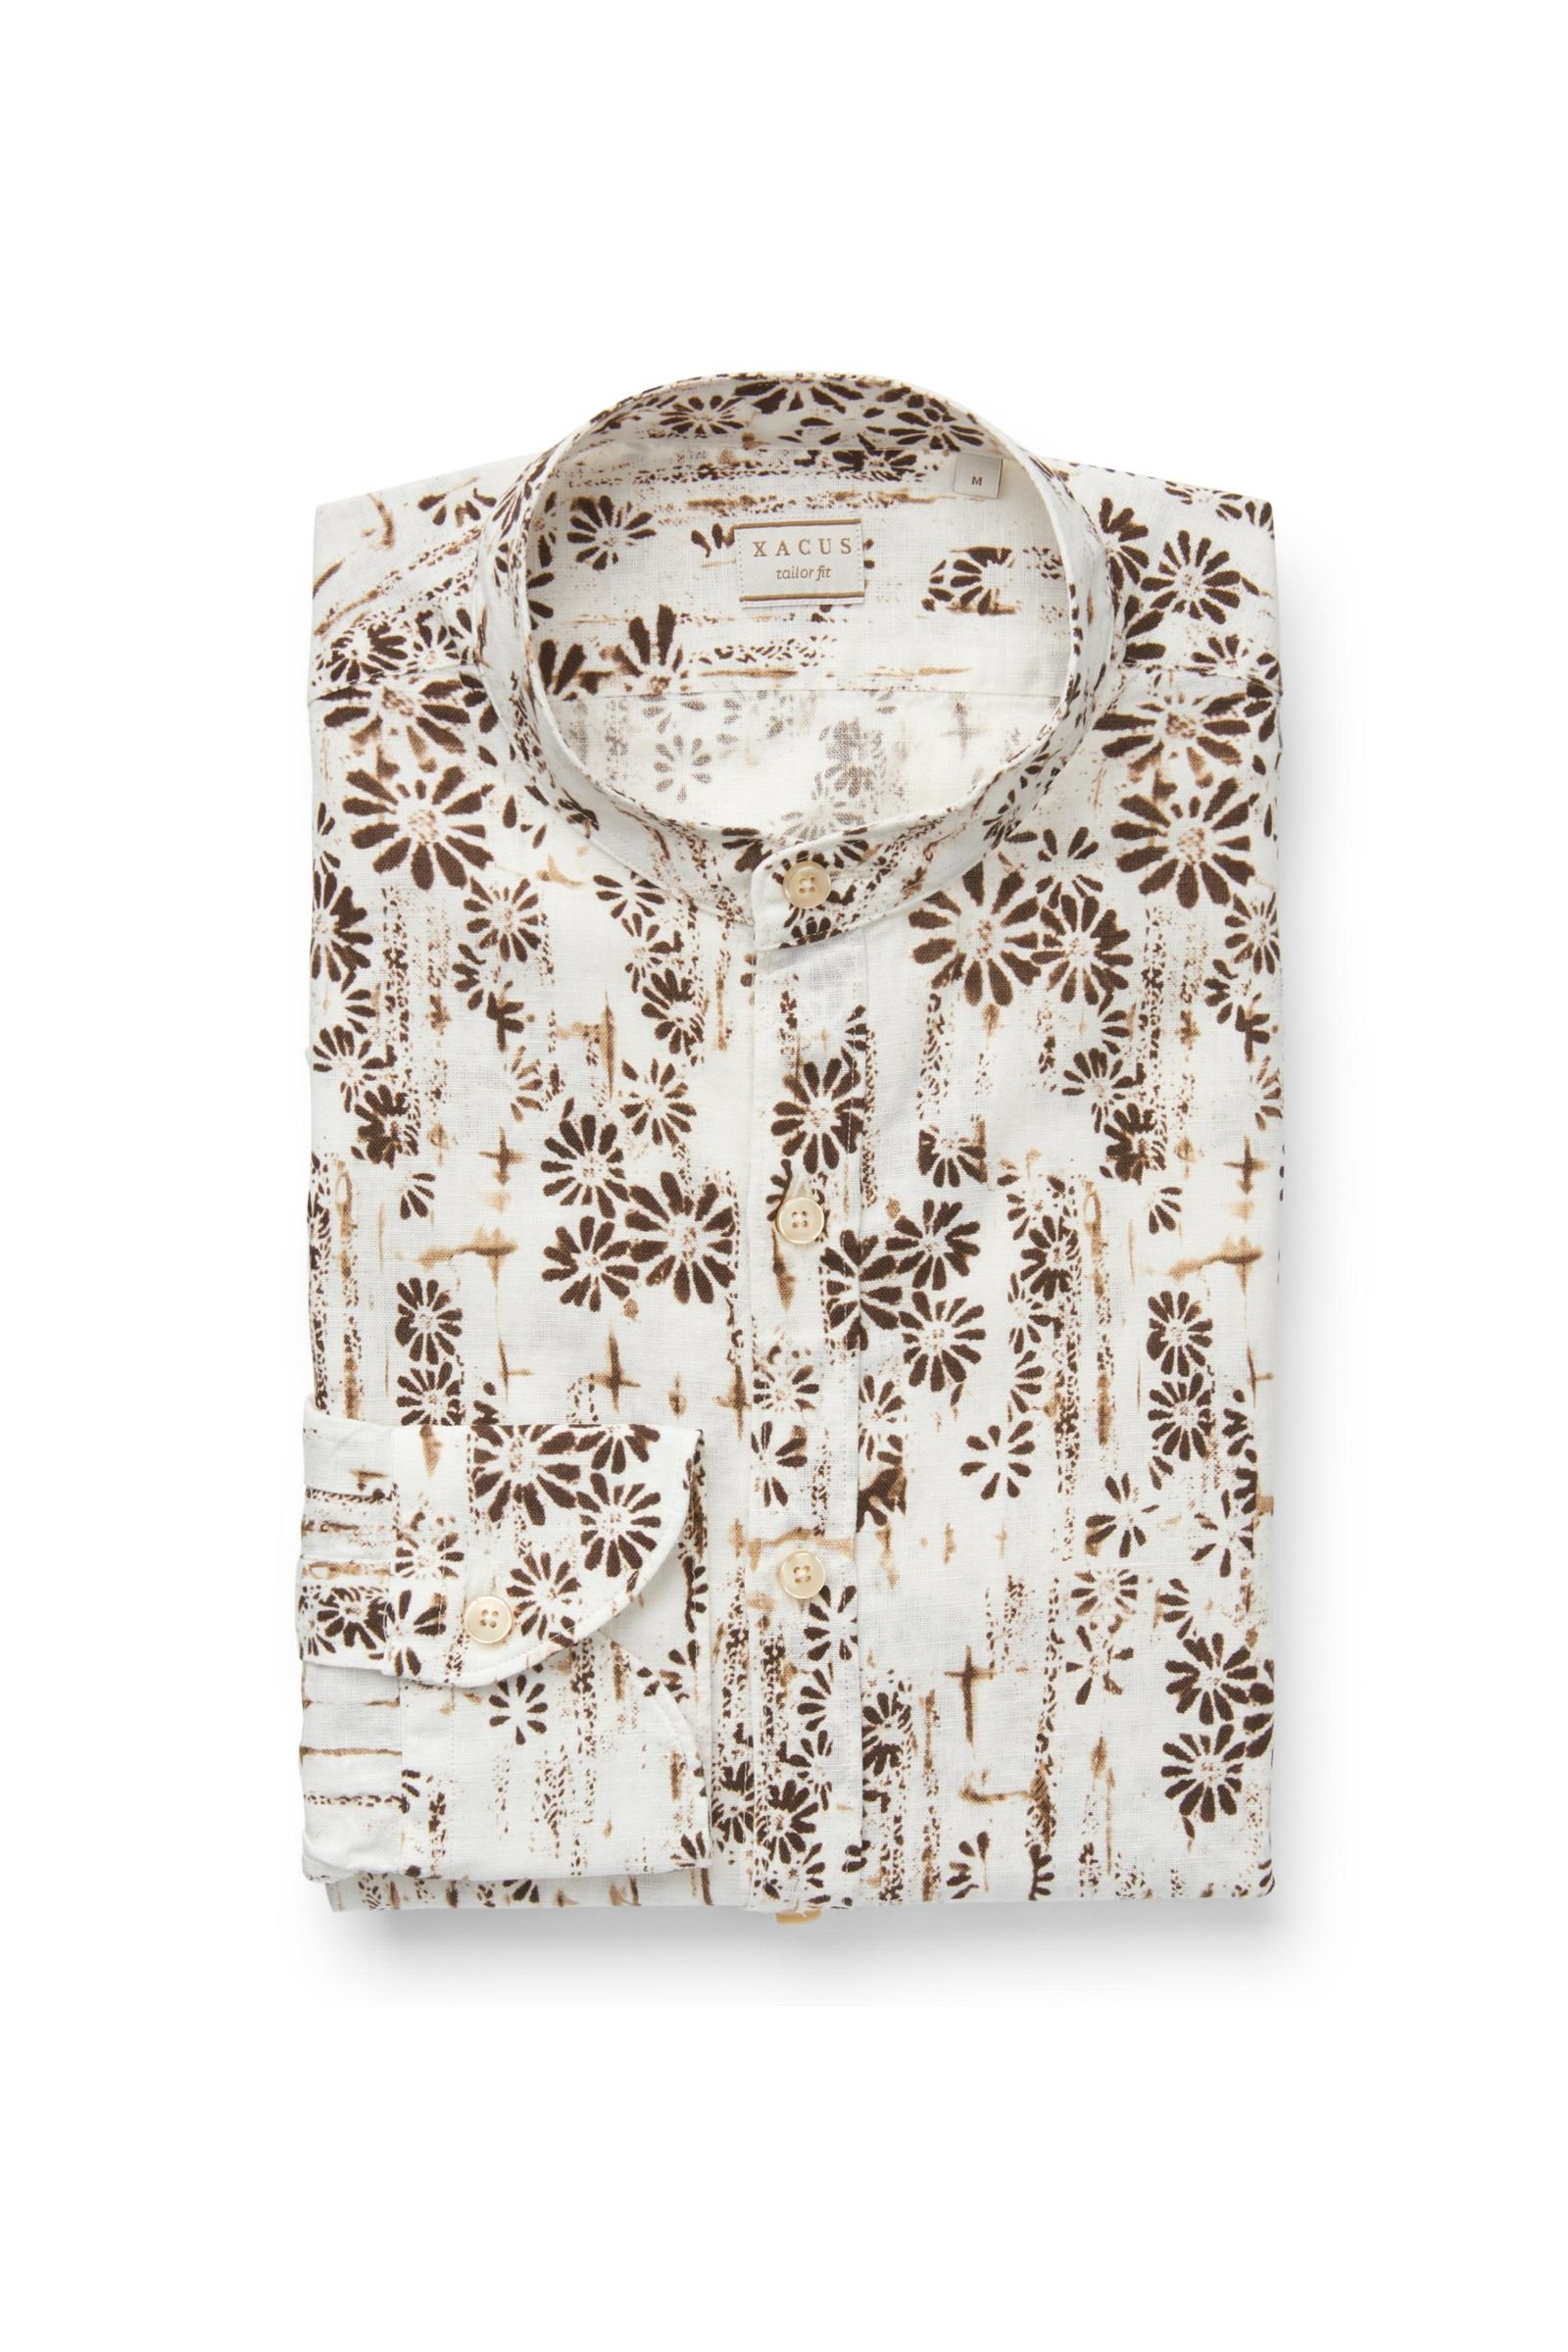 Casual shirt 'Tailor Fit' grandad collar off-white/brown patterned